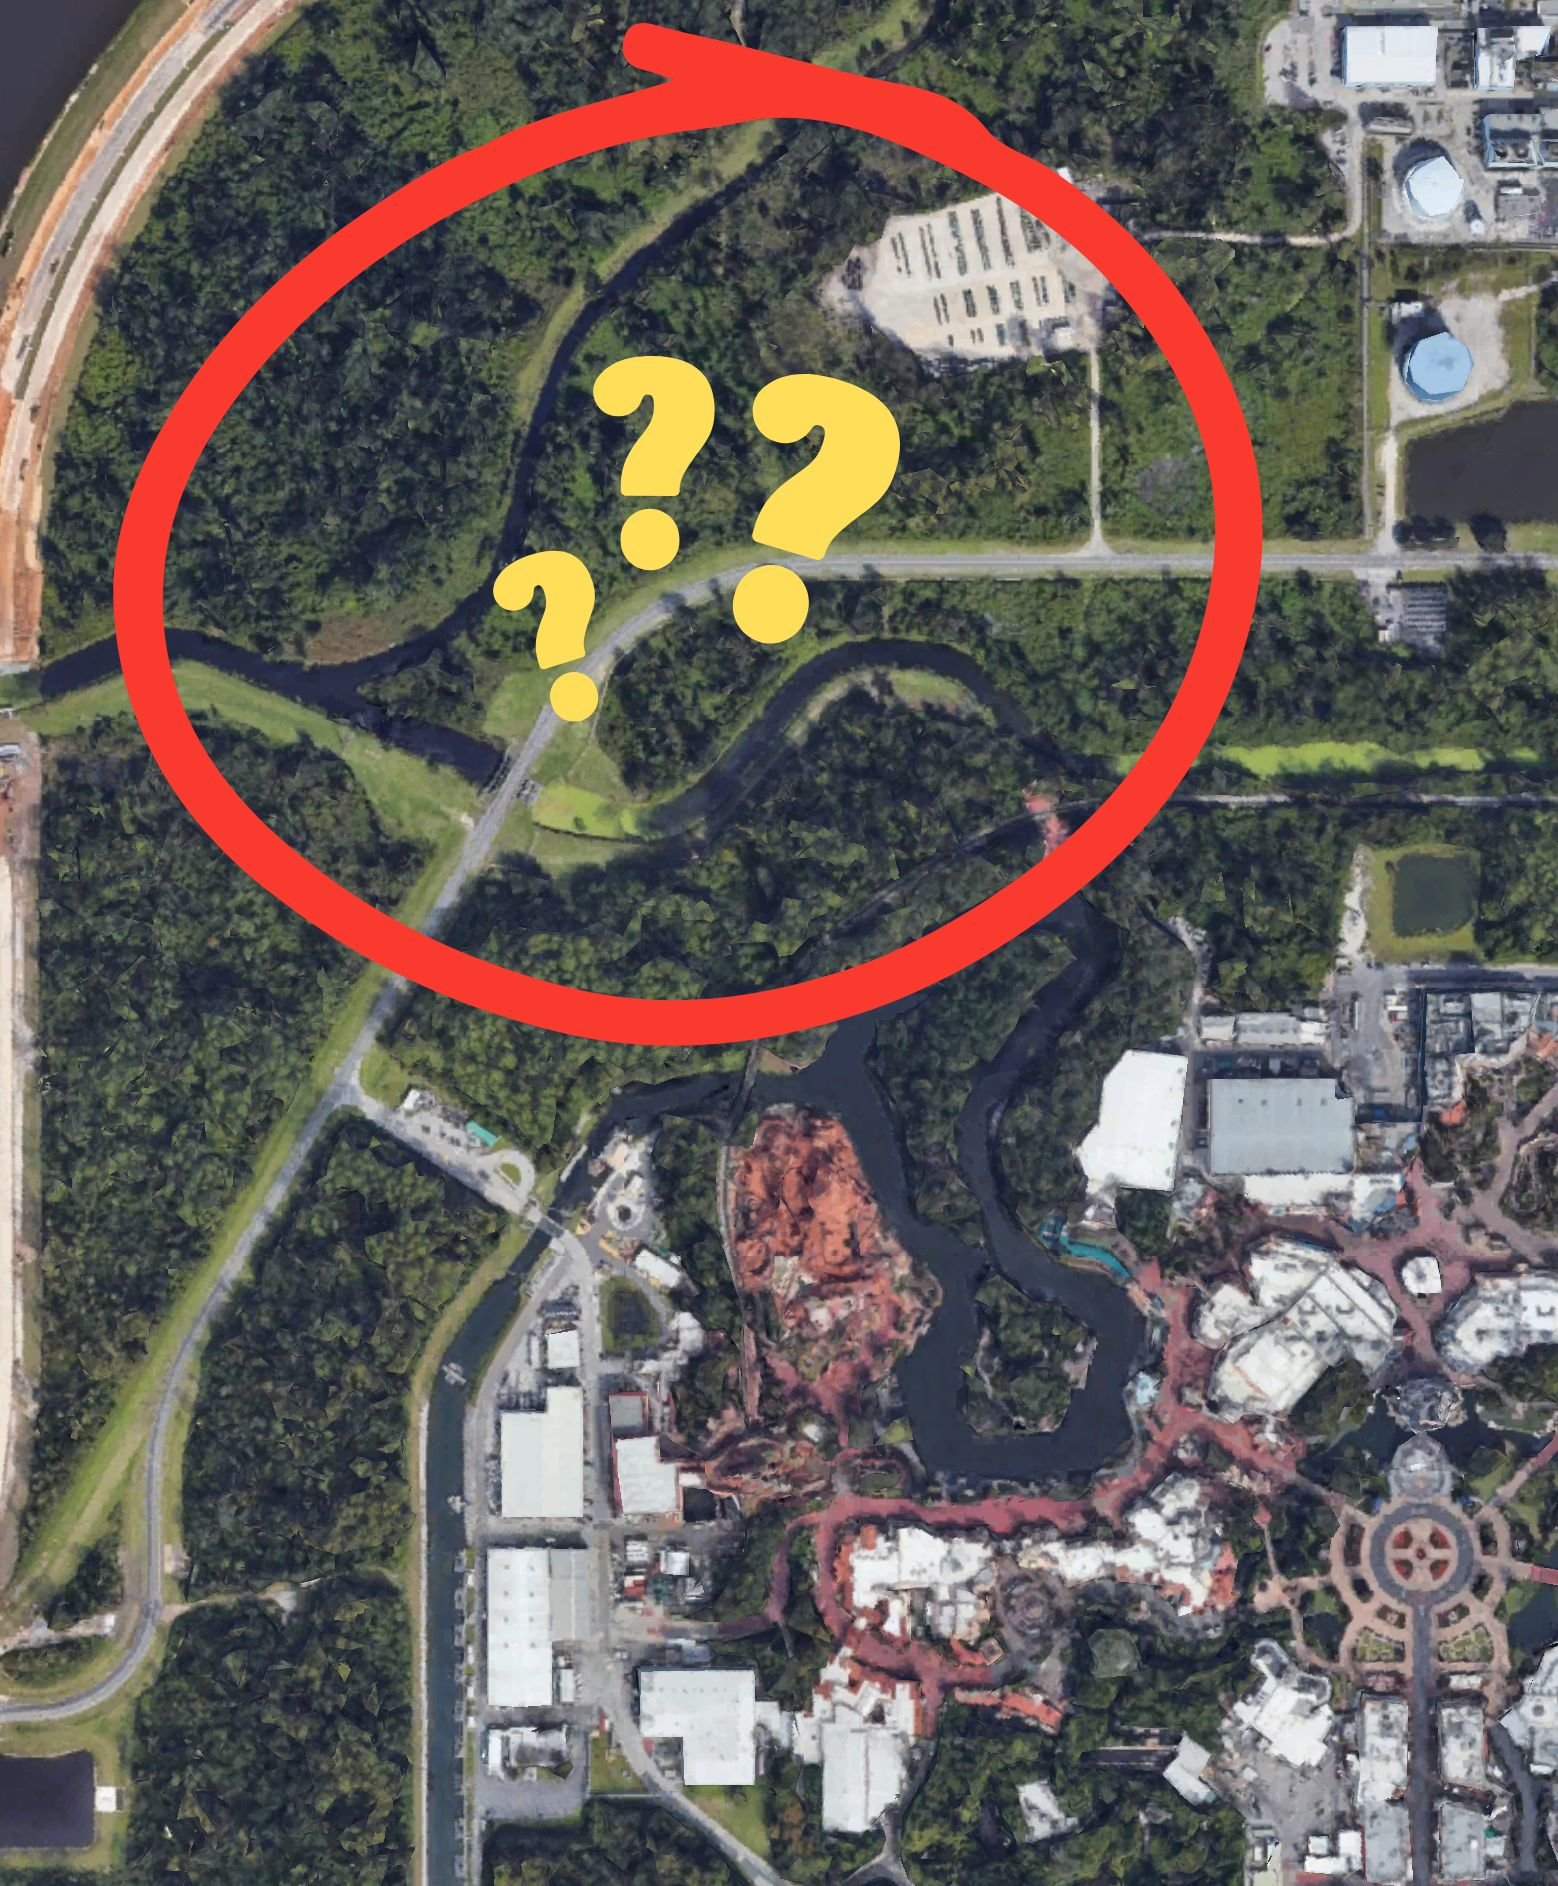 Map of possible Magic Kingdom expansion